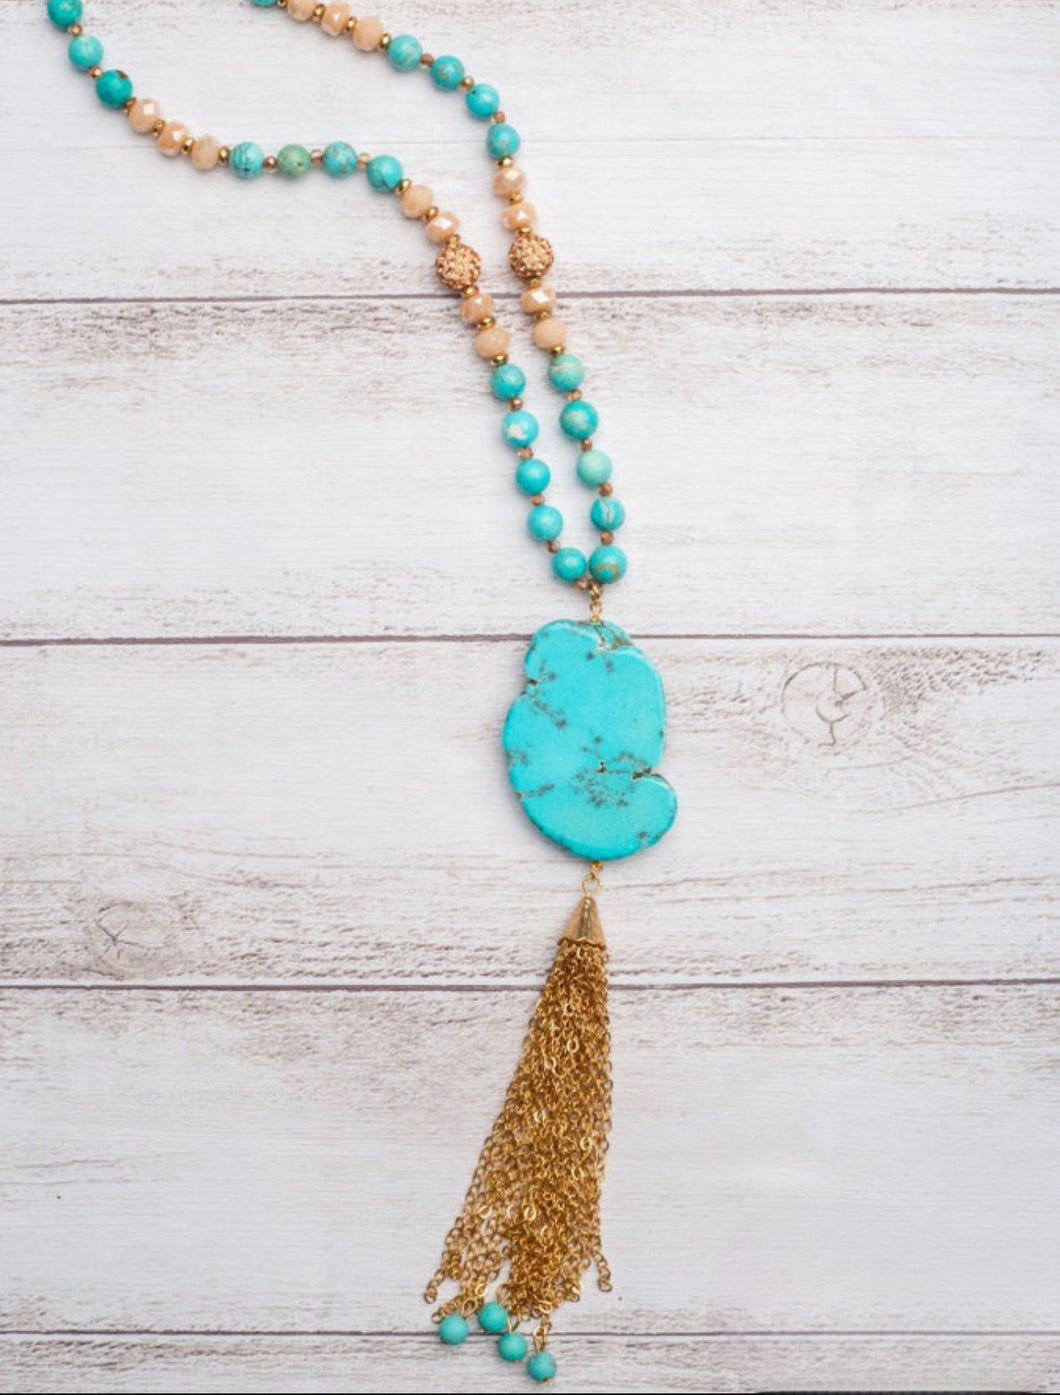 Turquoise slab with gold tassel necklace